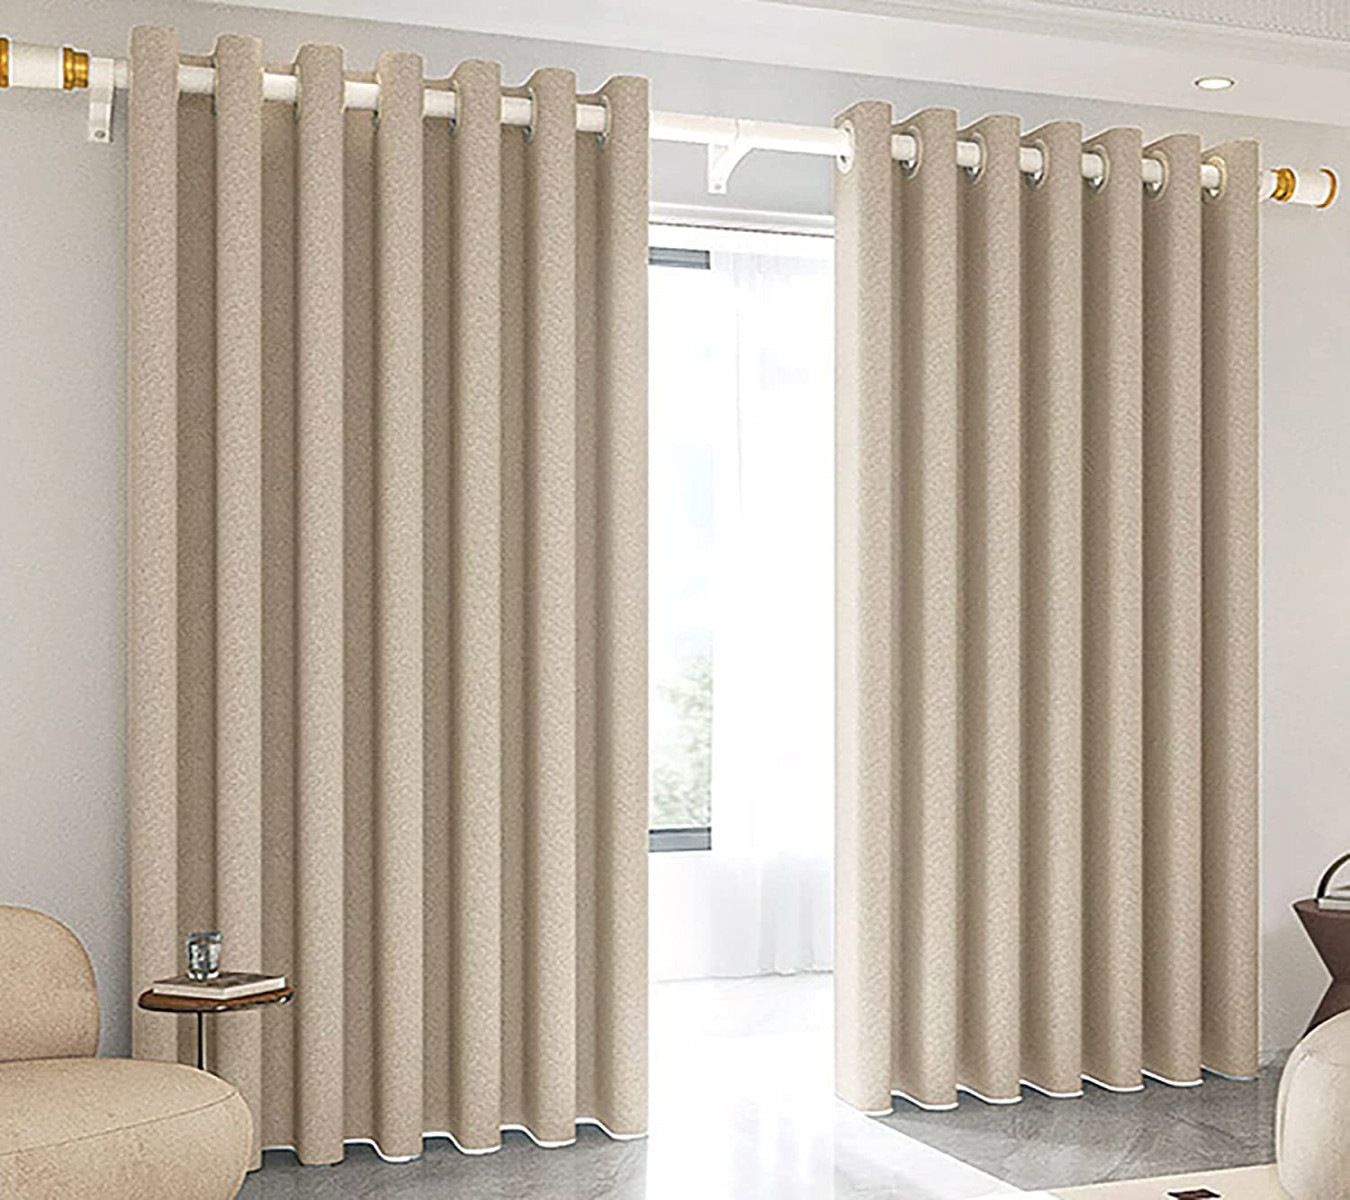 NCLOYN Textured Blackout Curtains Made of Linen with Hooks, Heat-Insulated  Window Curtains, Sound-Absorbing Curtains, Privacy Window Treatments for